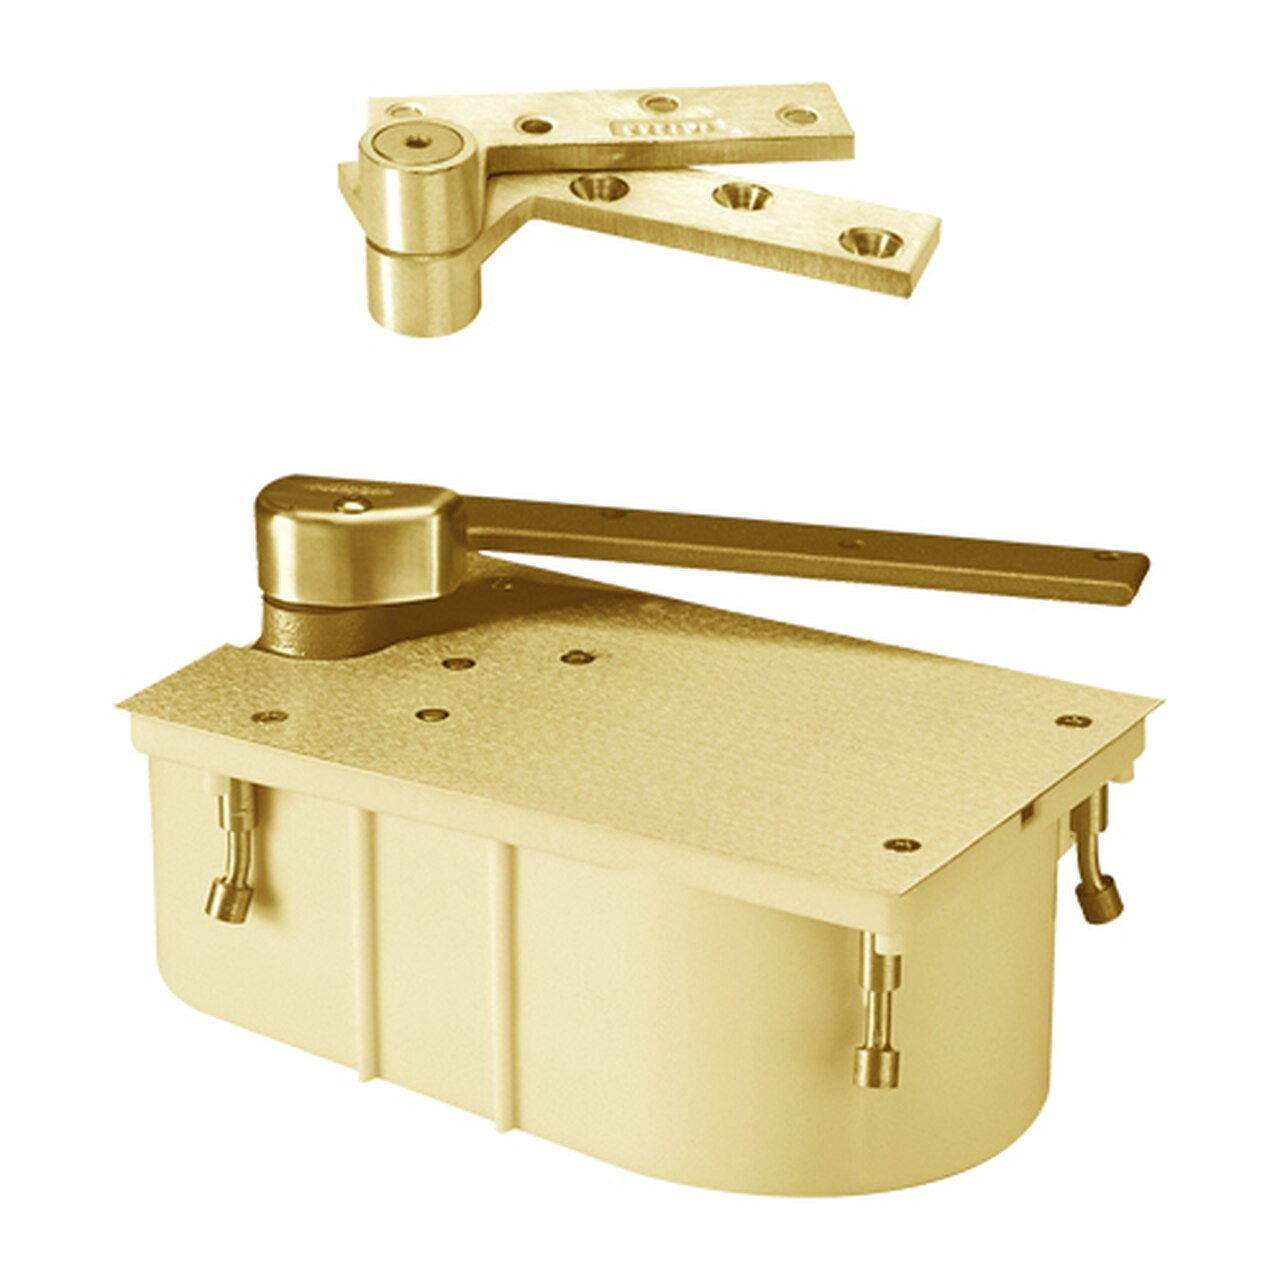 F27-105N-LFP-CWF-LH-605 Rixson 27 Series Fire Rated Heavy Duty 3/4" Offset Hung Floor Closer in Bright Brass Finish